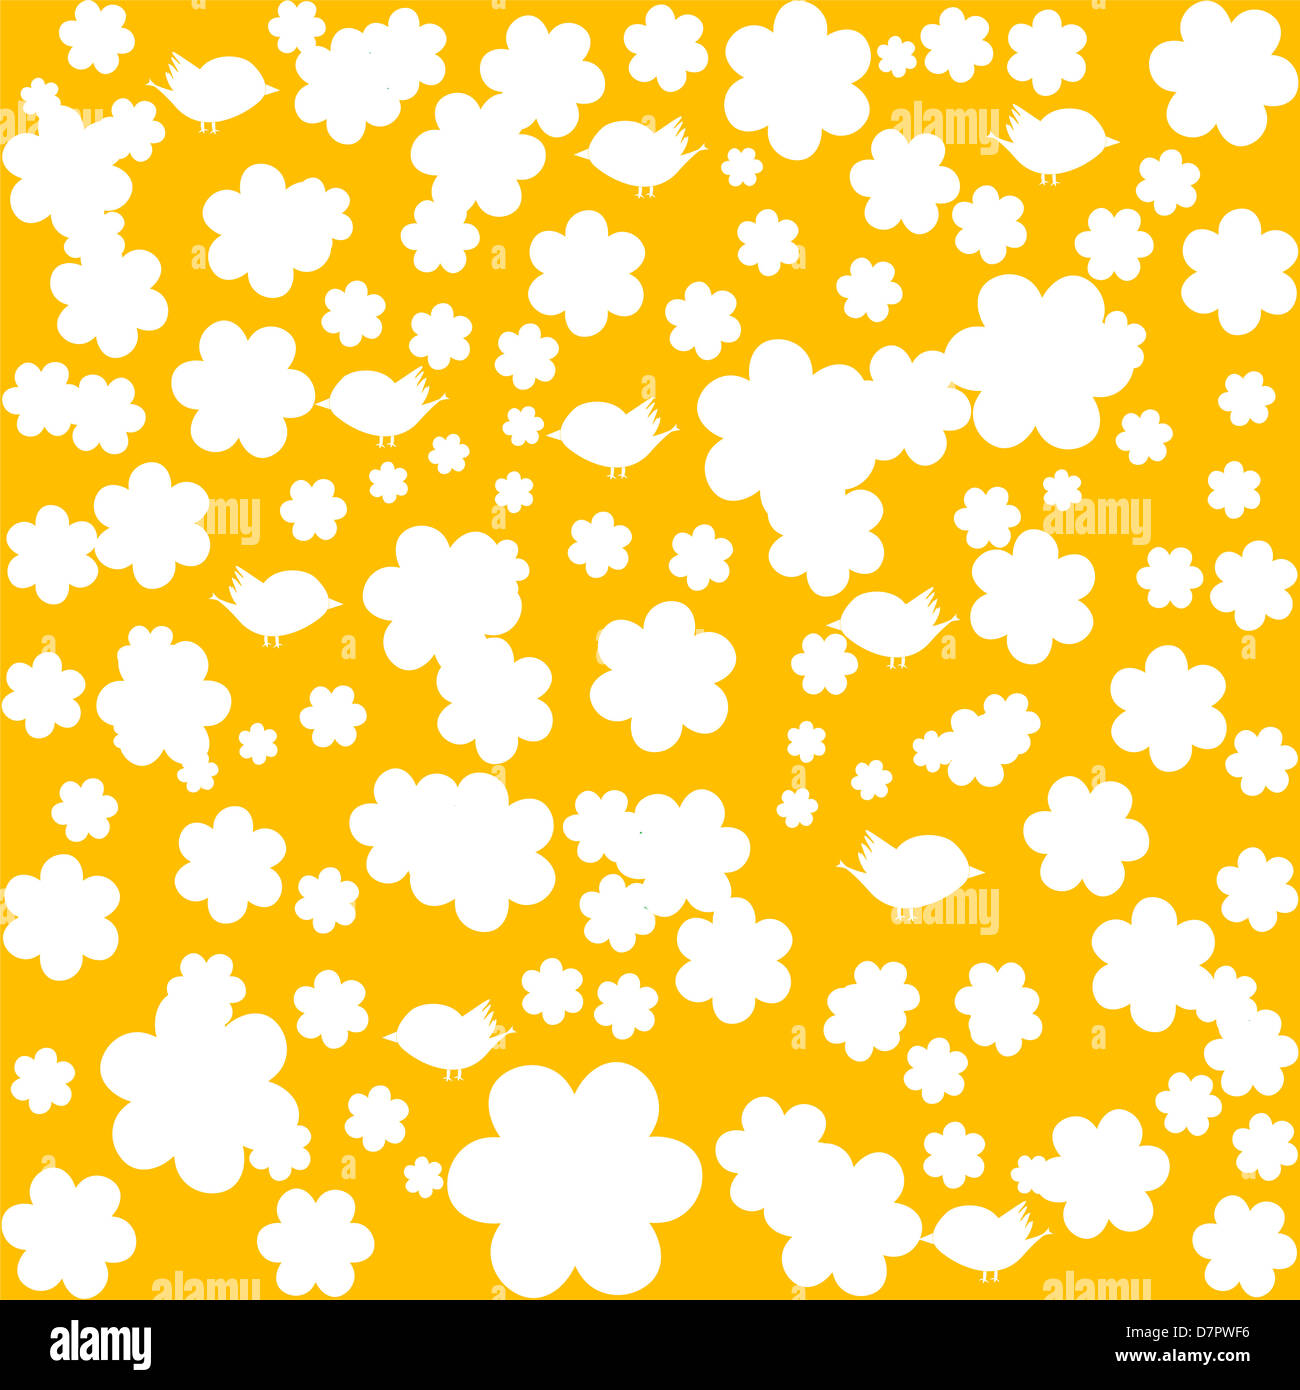 Seamless floral cute patterns in yellow colors Stock Photo